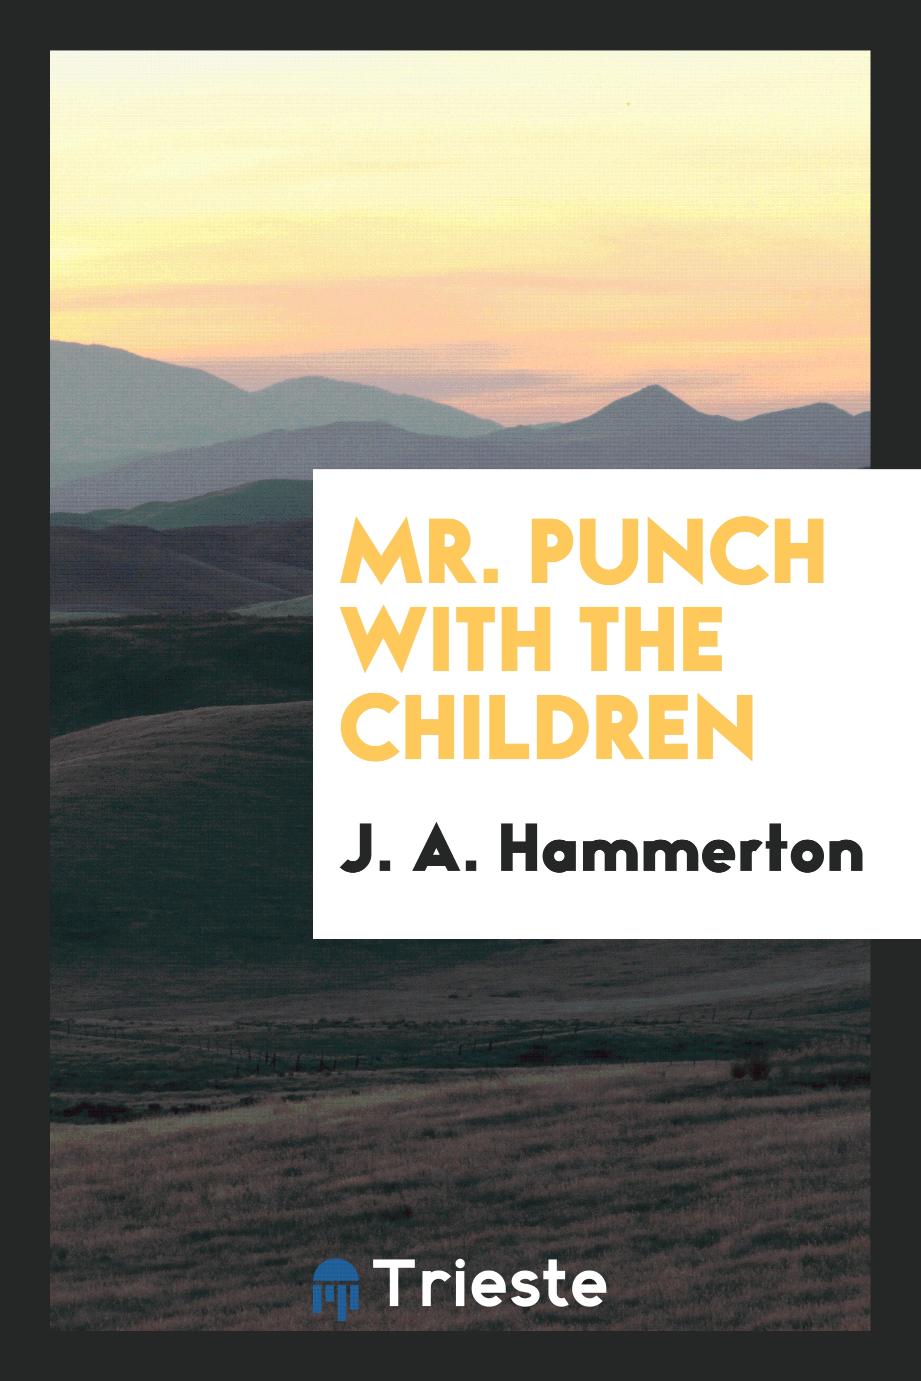 Mr. Punch with the children